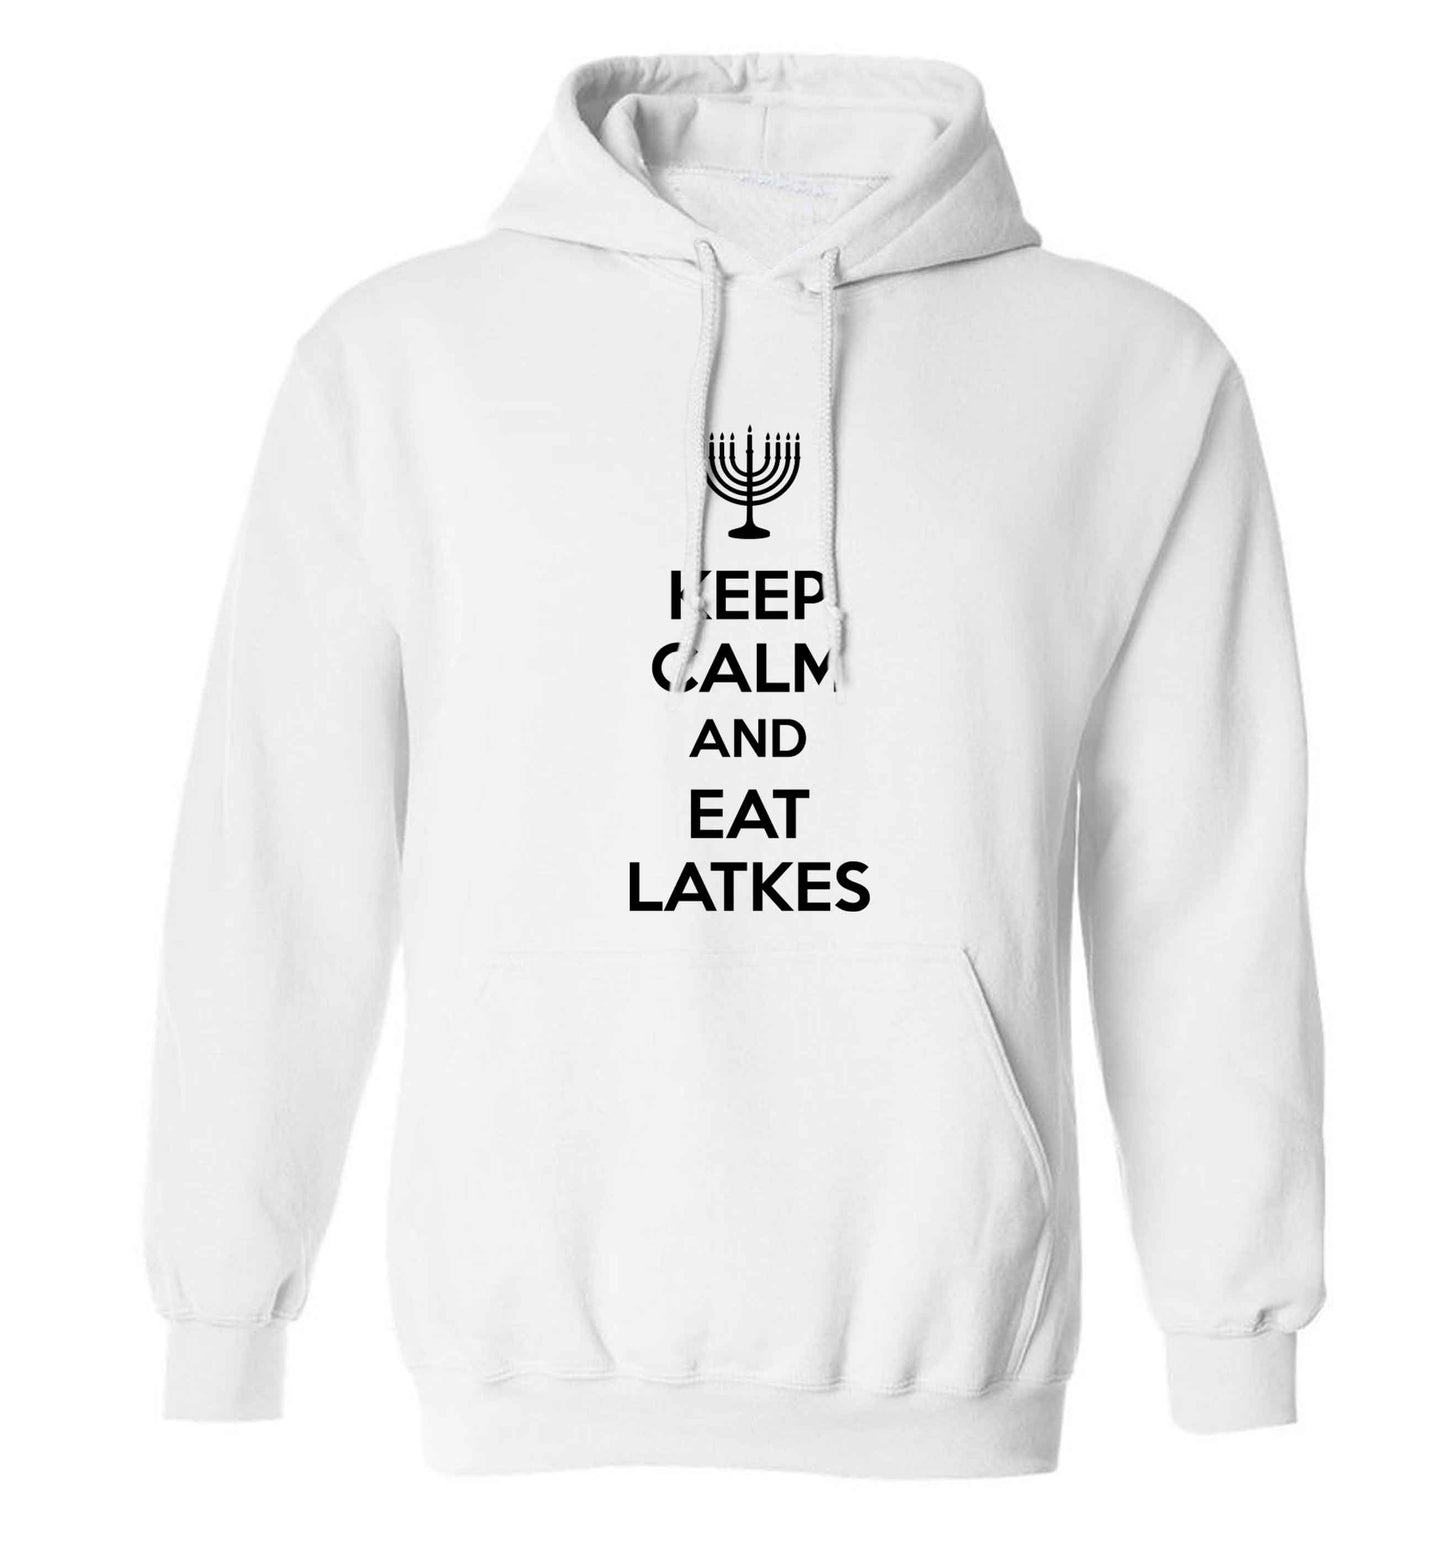 Keep calm and eat latkes adults unisex white hoodie 2XL